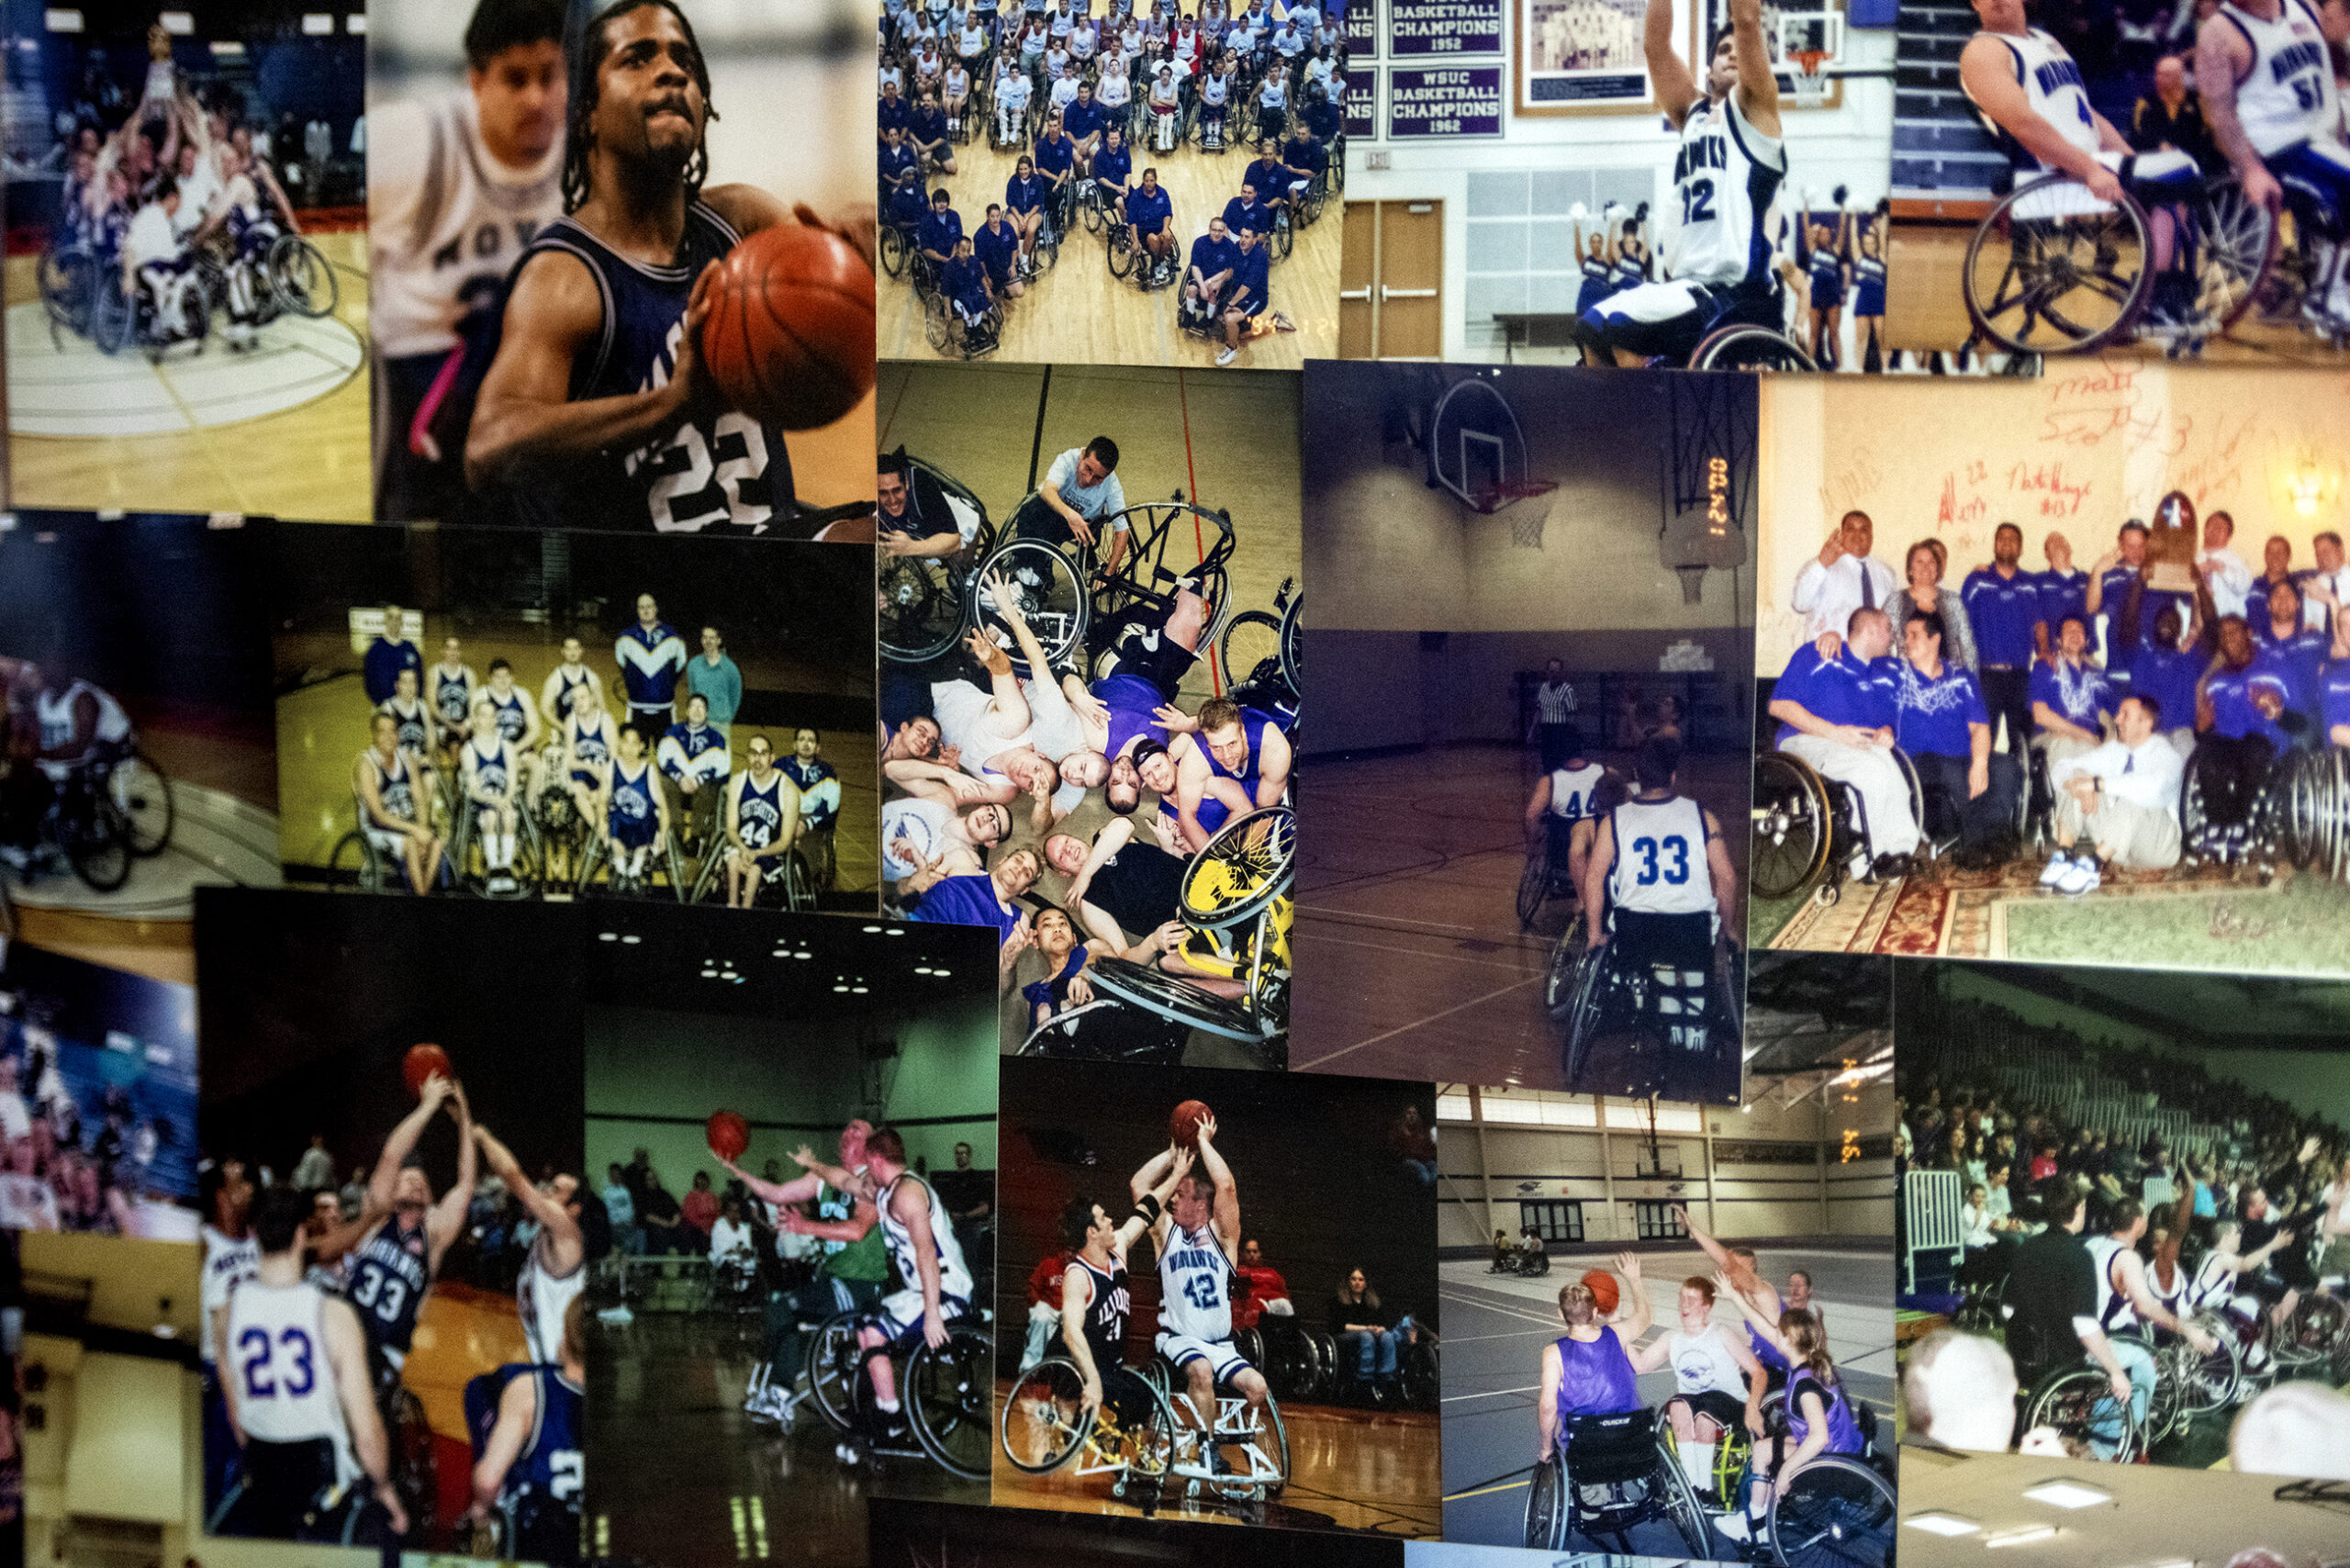 Printed photos showing basketball games and past teams are hung in a collage style.